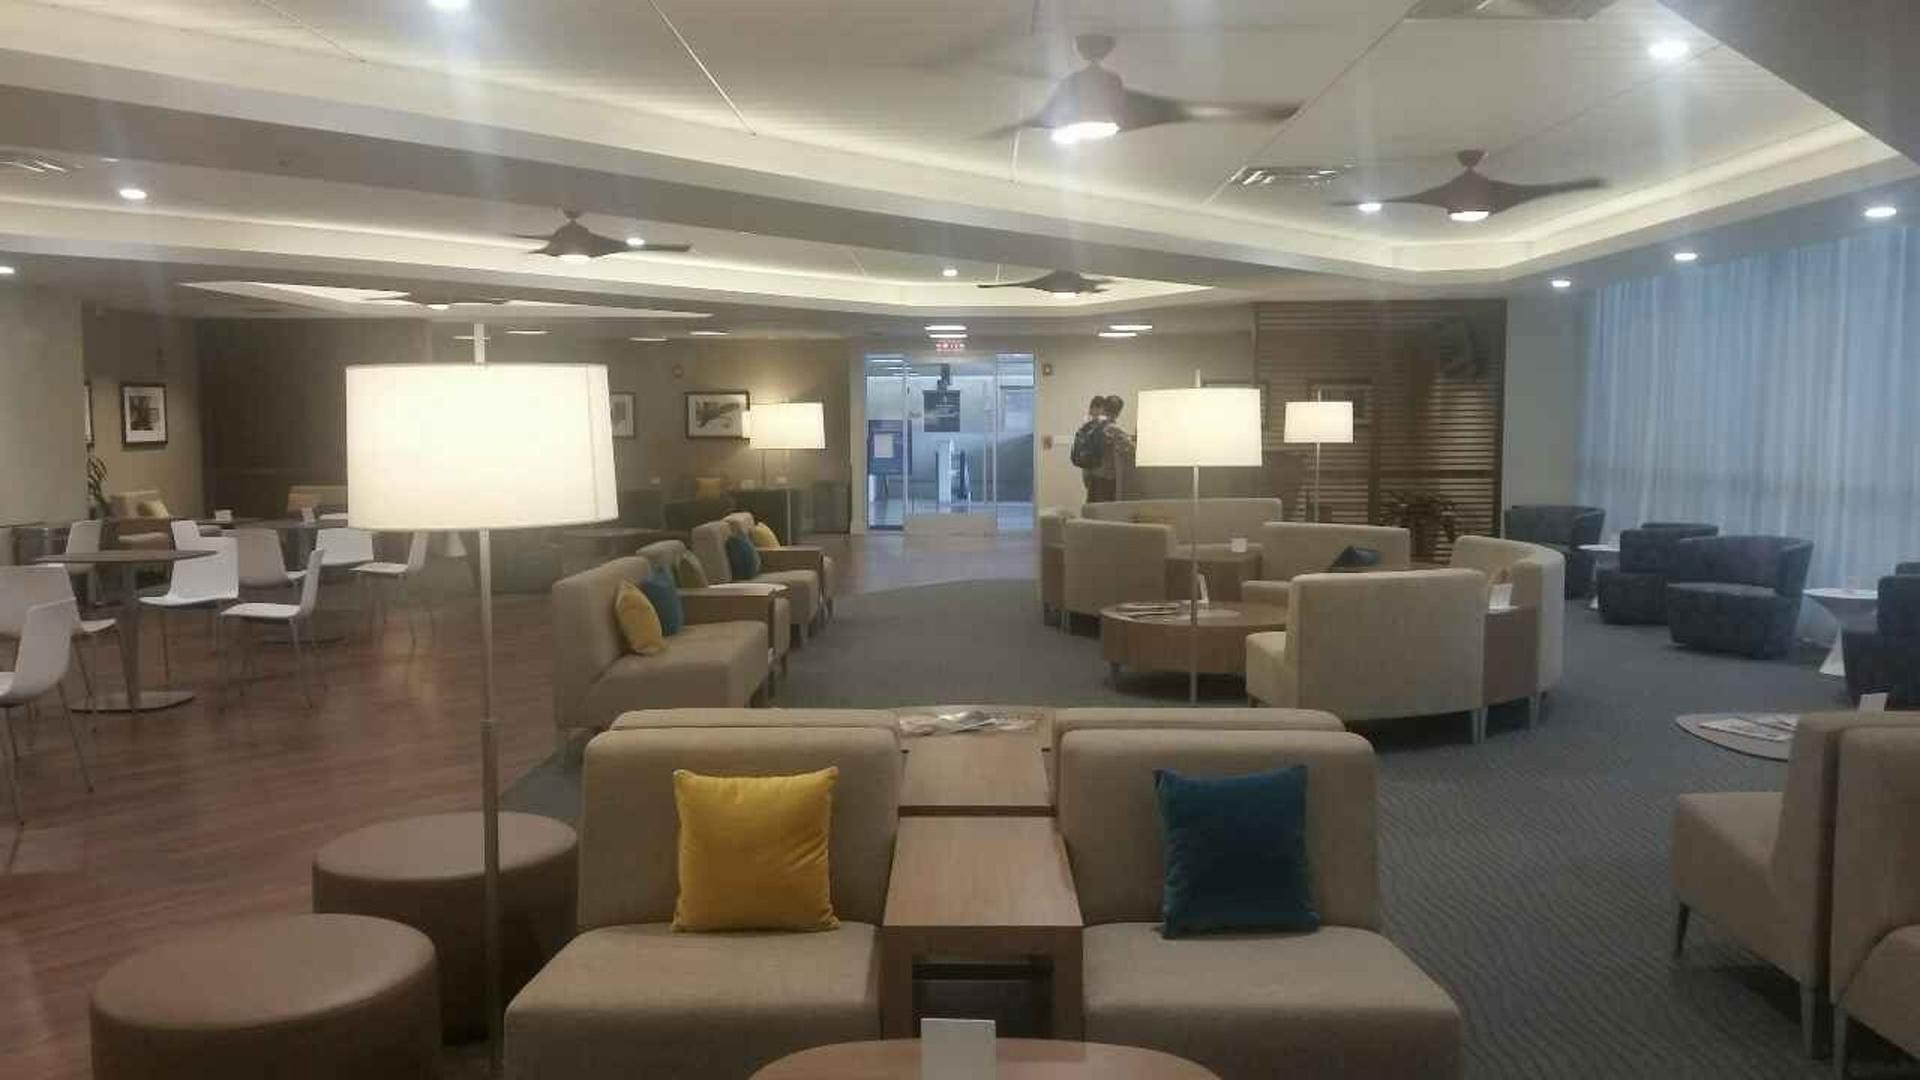 Hawaiian Airlines The Plumeria Lounge image 19 of 41